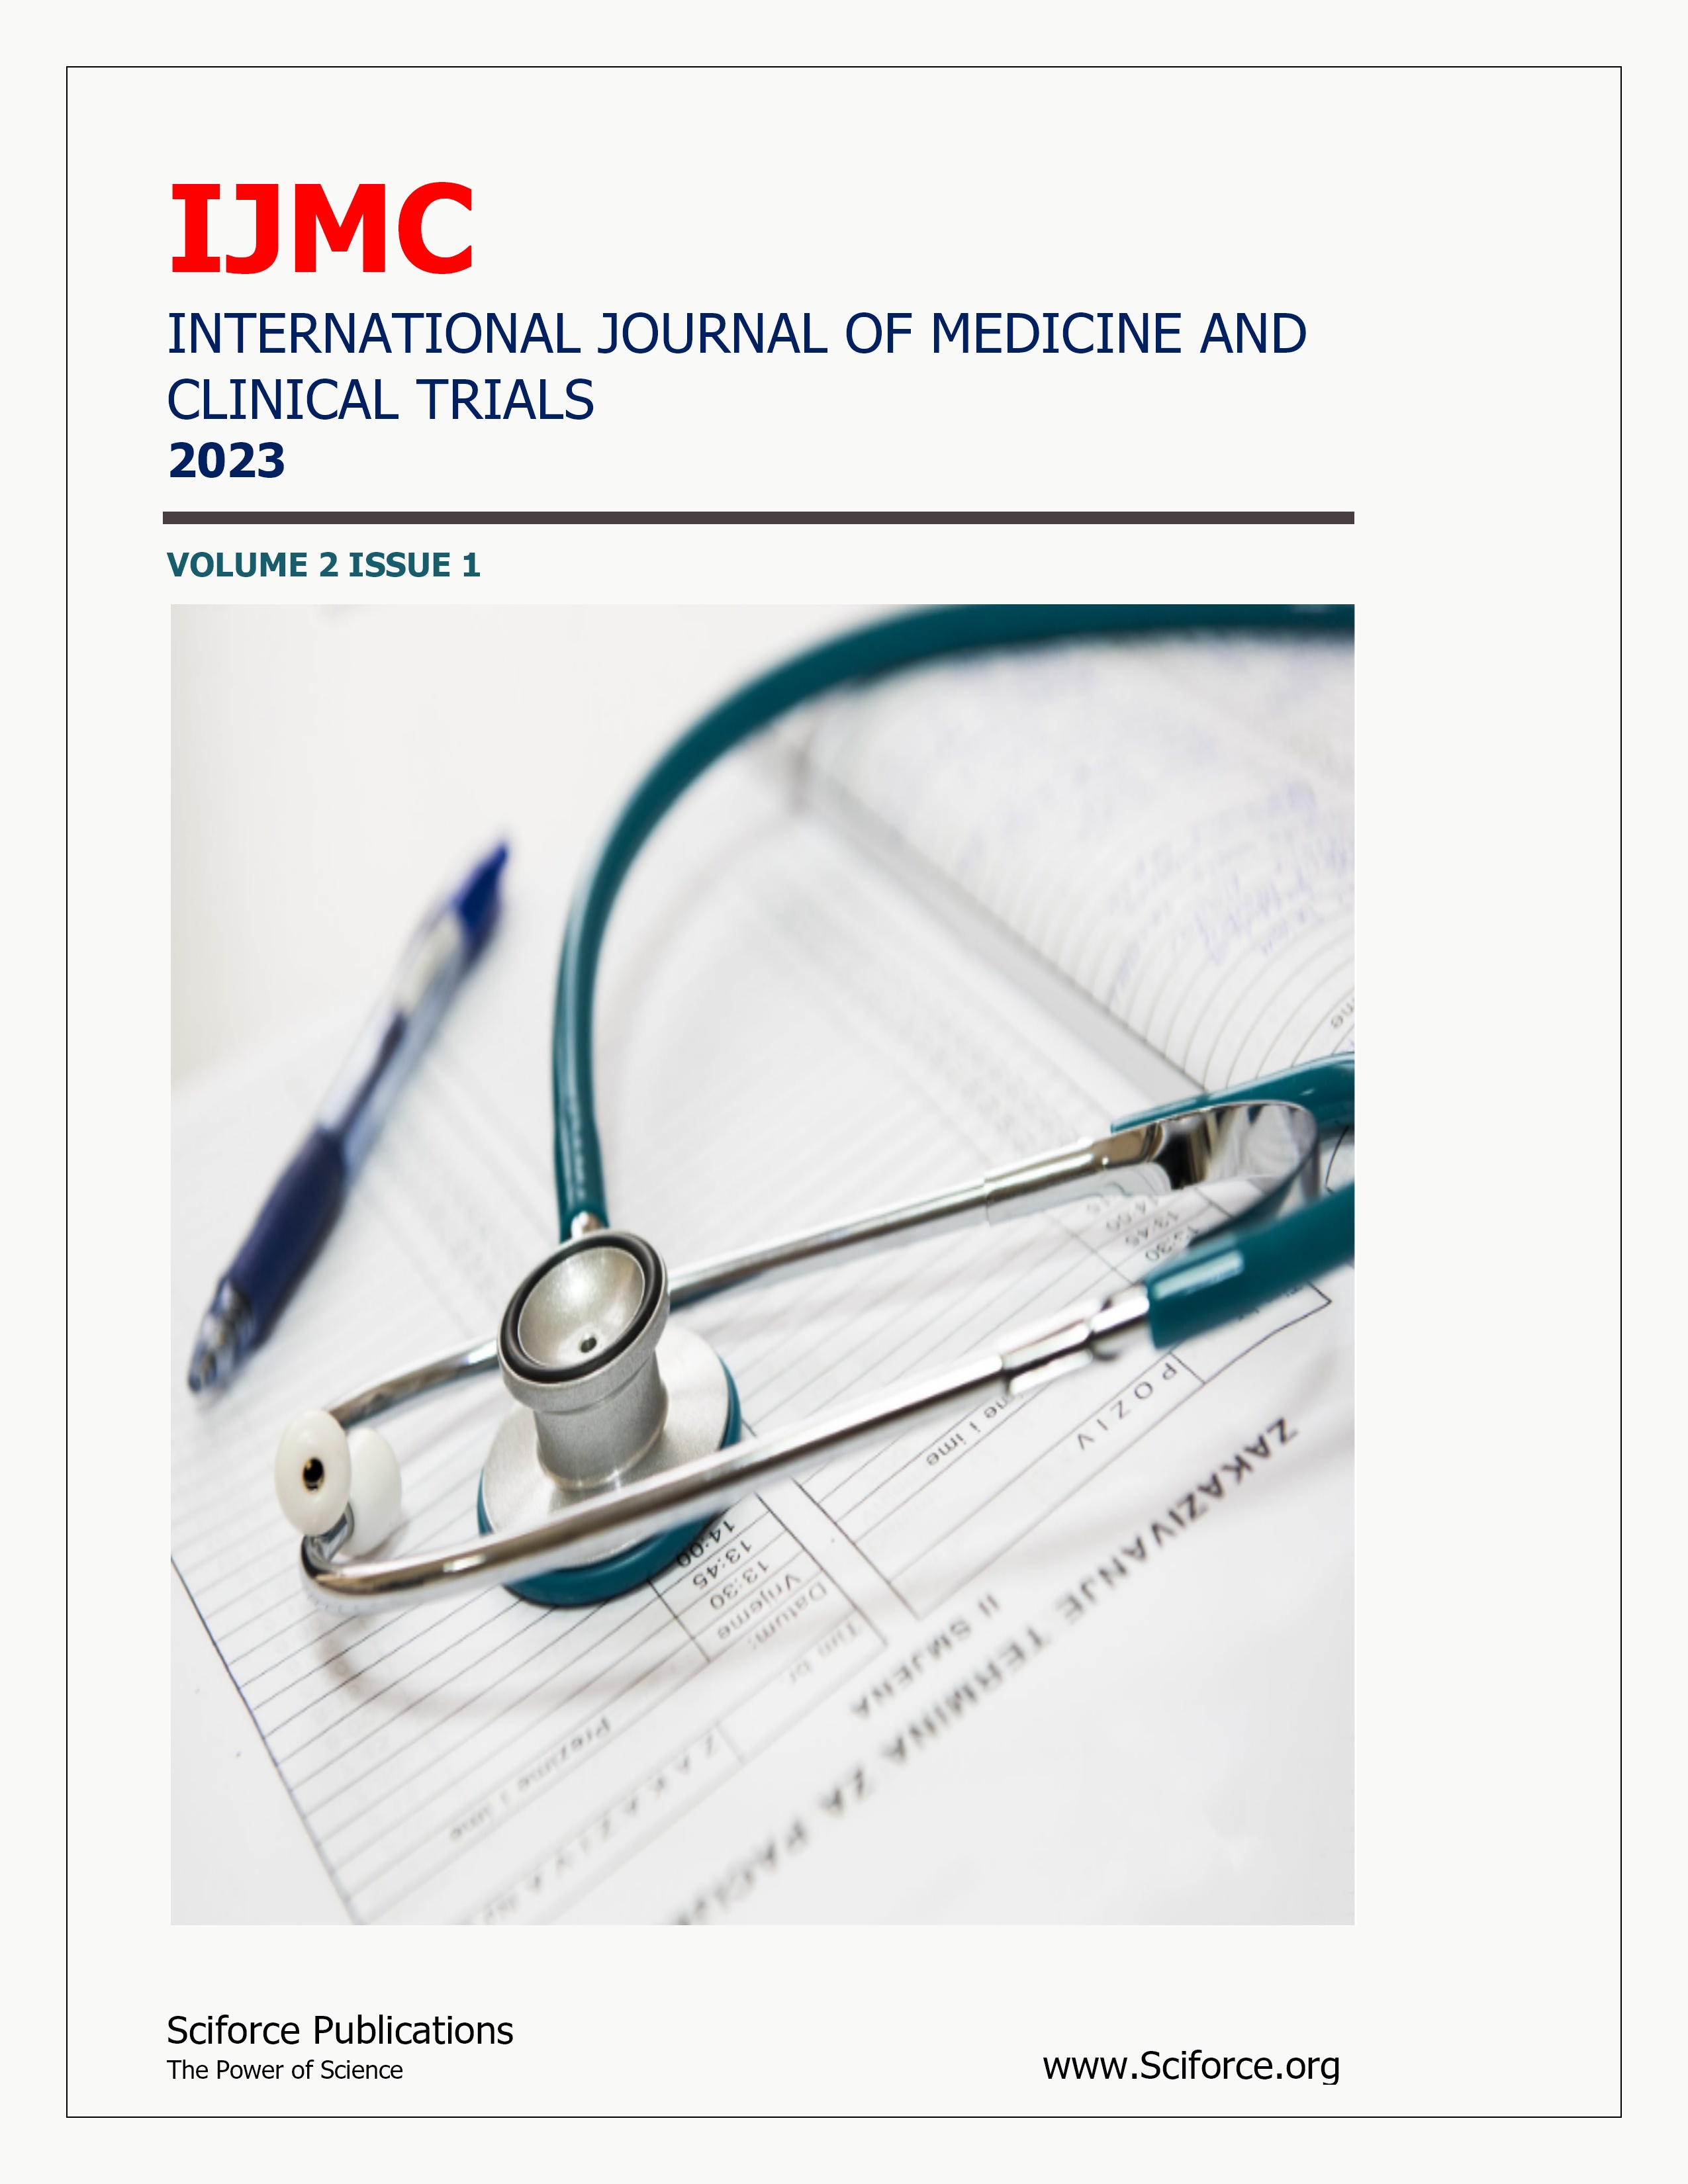 International Journal of Medicine And Clinical Trials